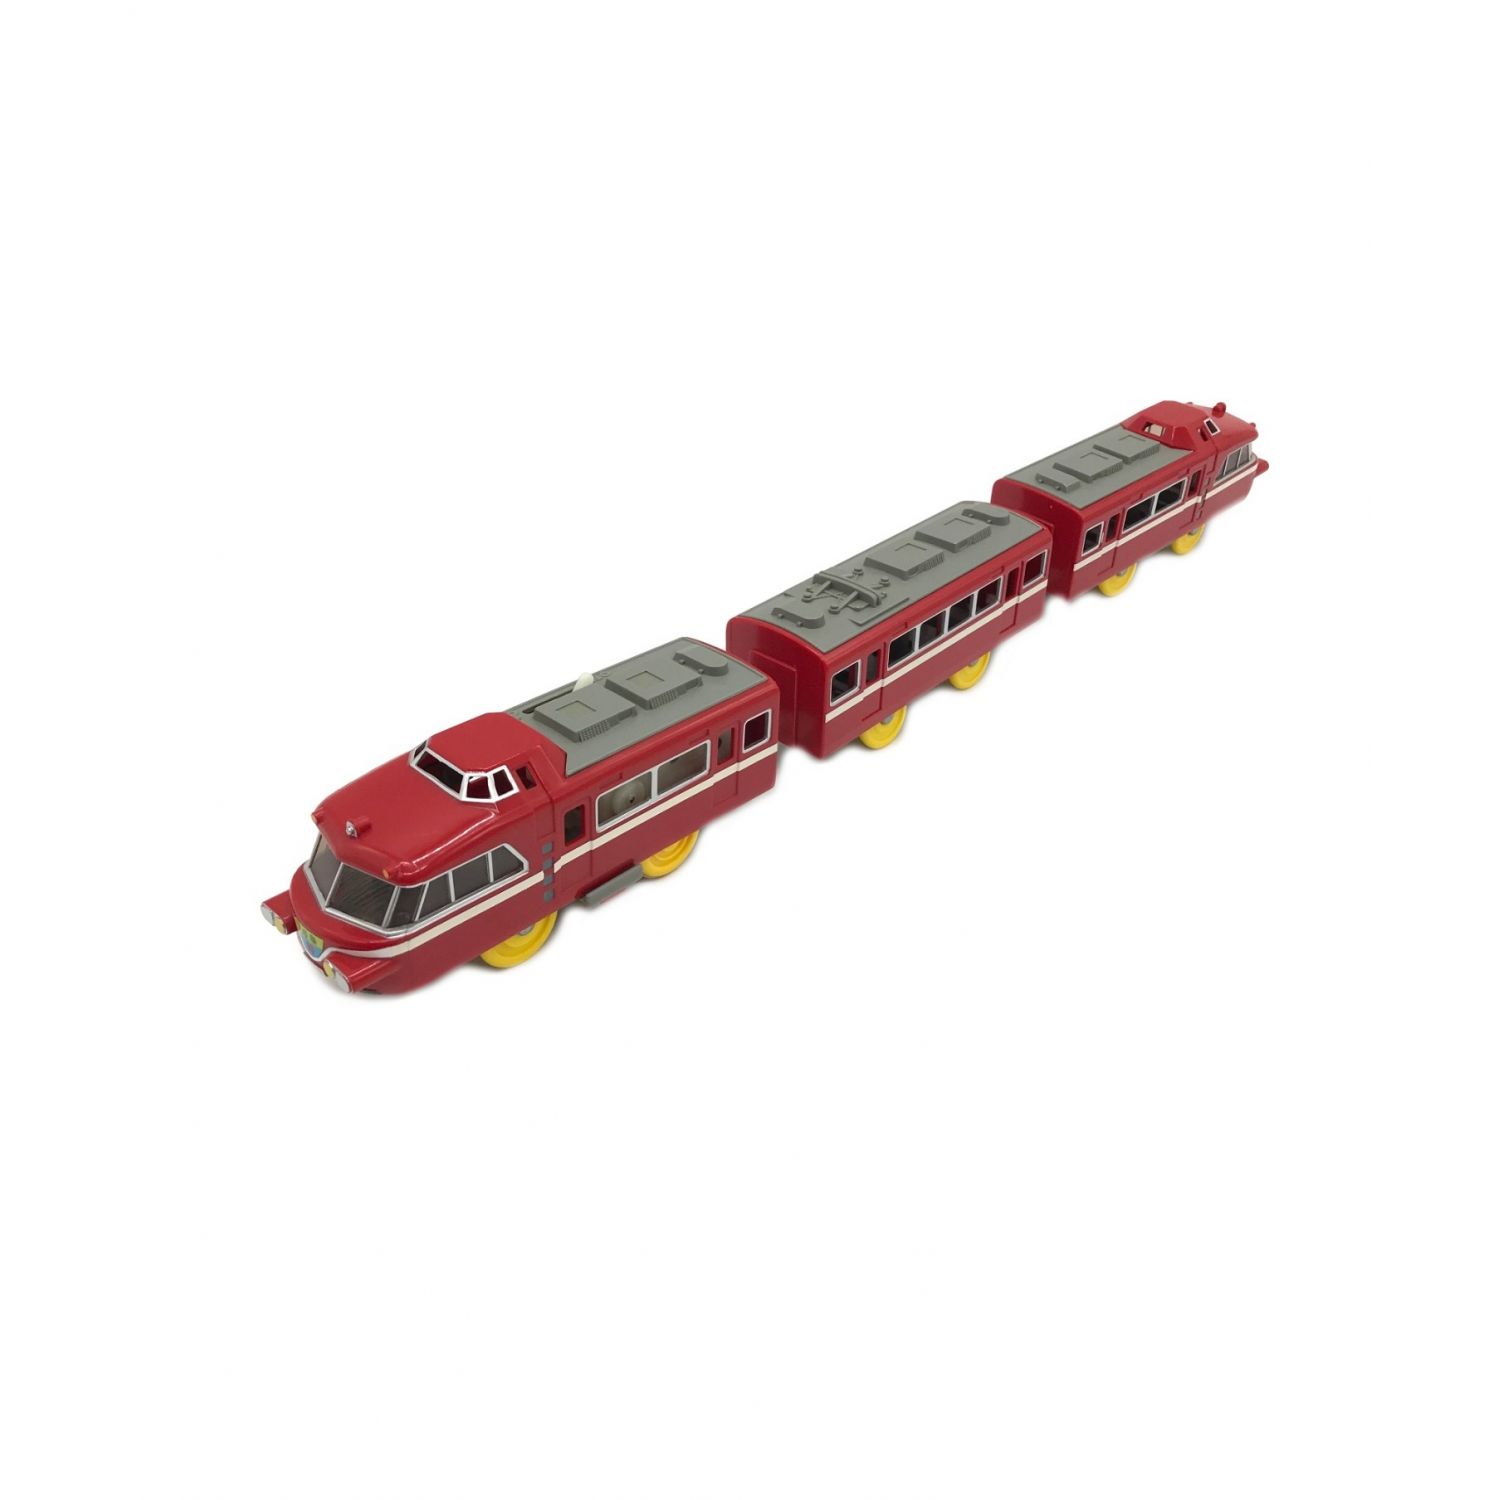 TOMY (トミー) プラレール 車両セット 名鉄7000系パノラマカー（白 